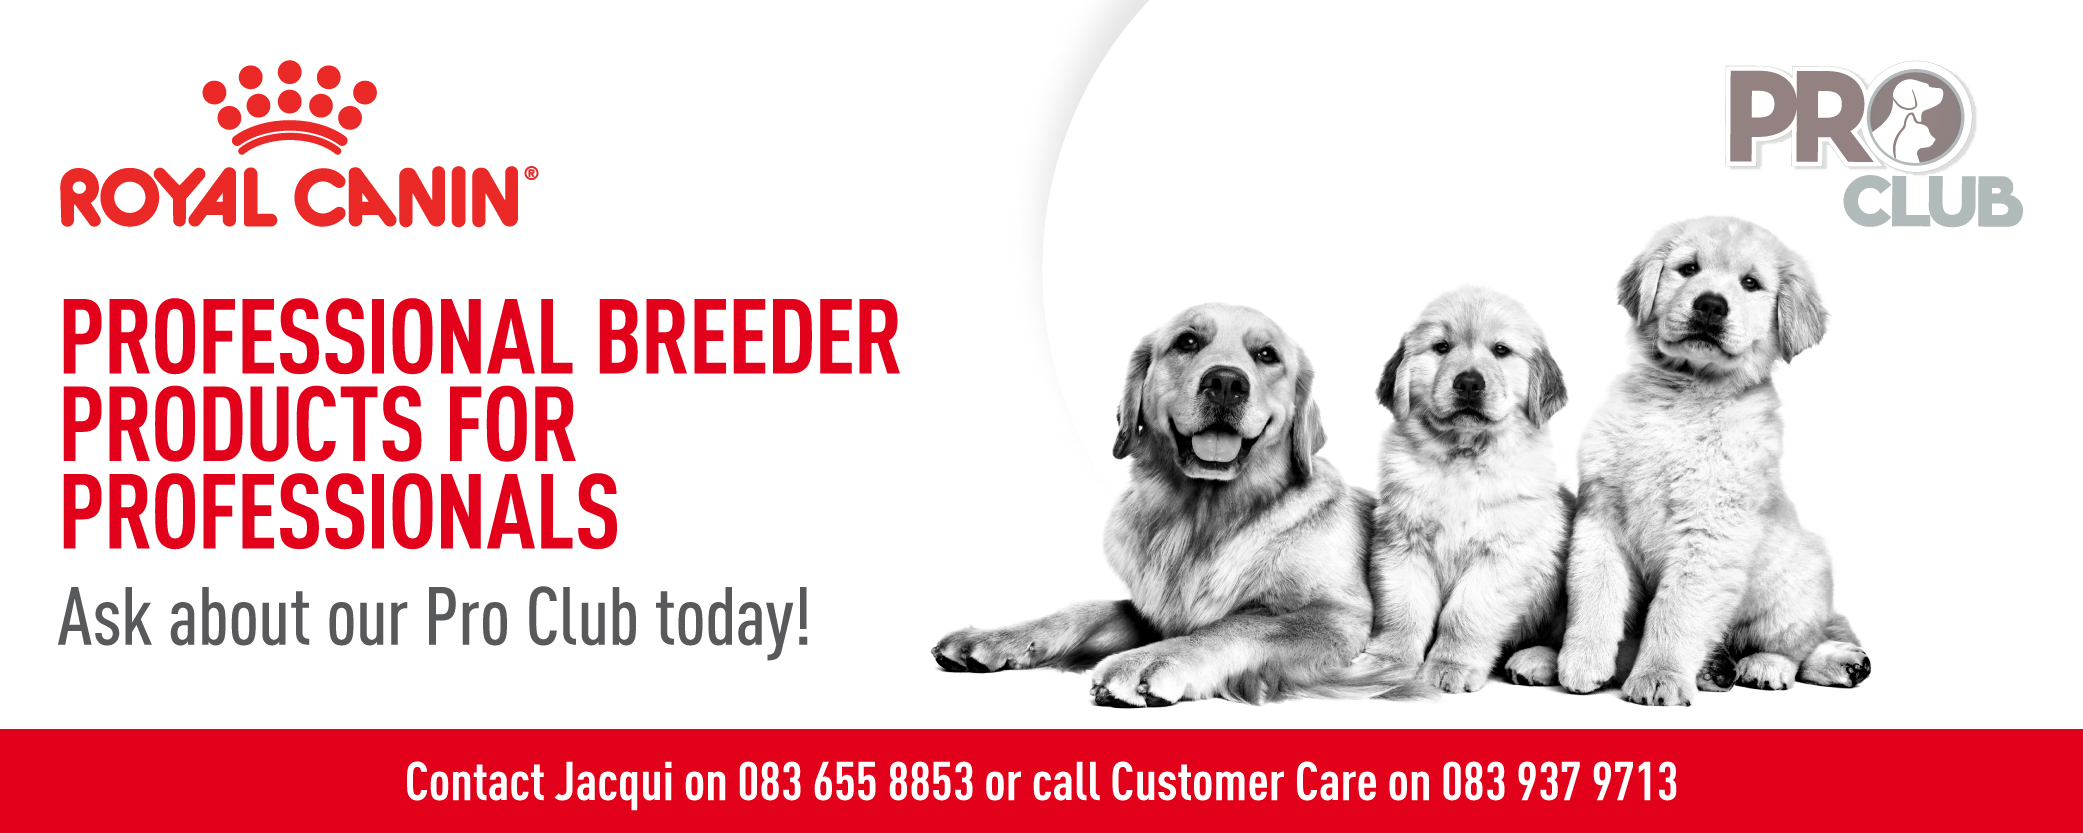 1003RC Kusa Website Royal Canin V4 Professional Breeder Products for Professionals